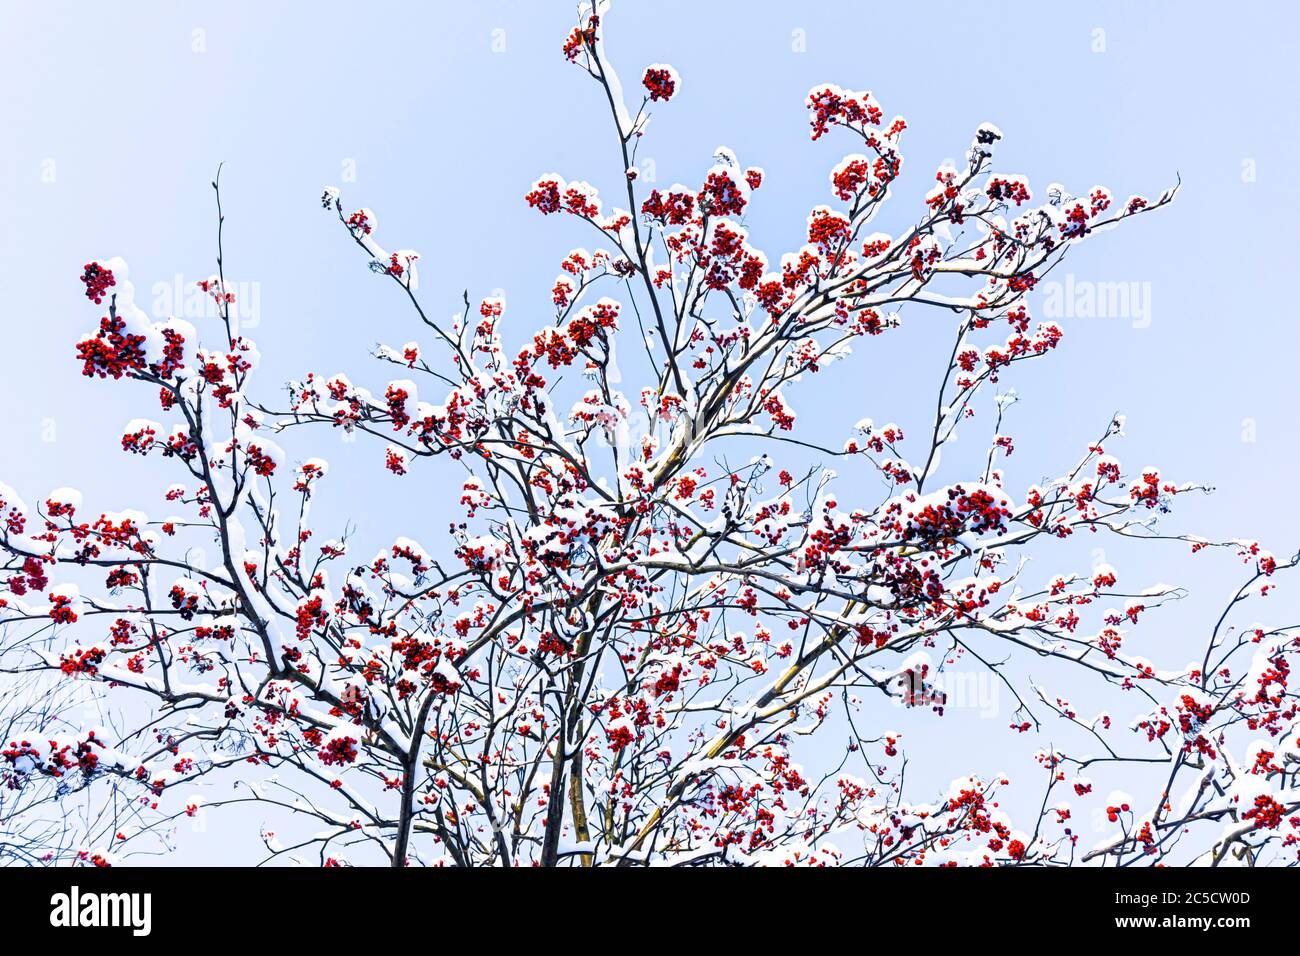 Christmas winter background with blue sky, hawthorn berries, Stock Photo